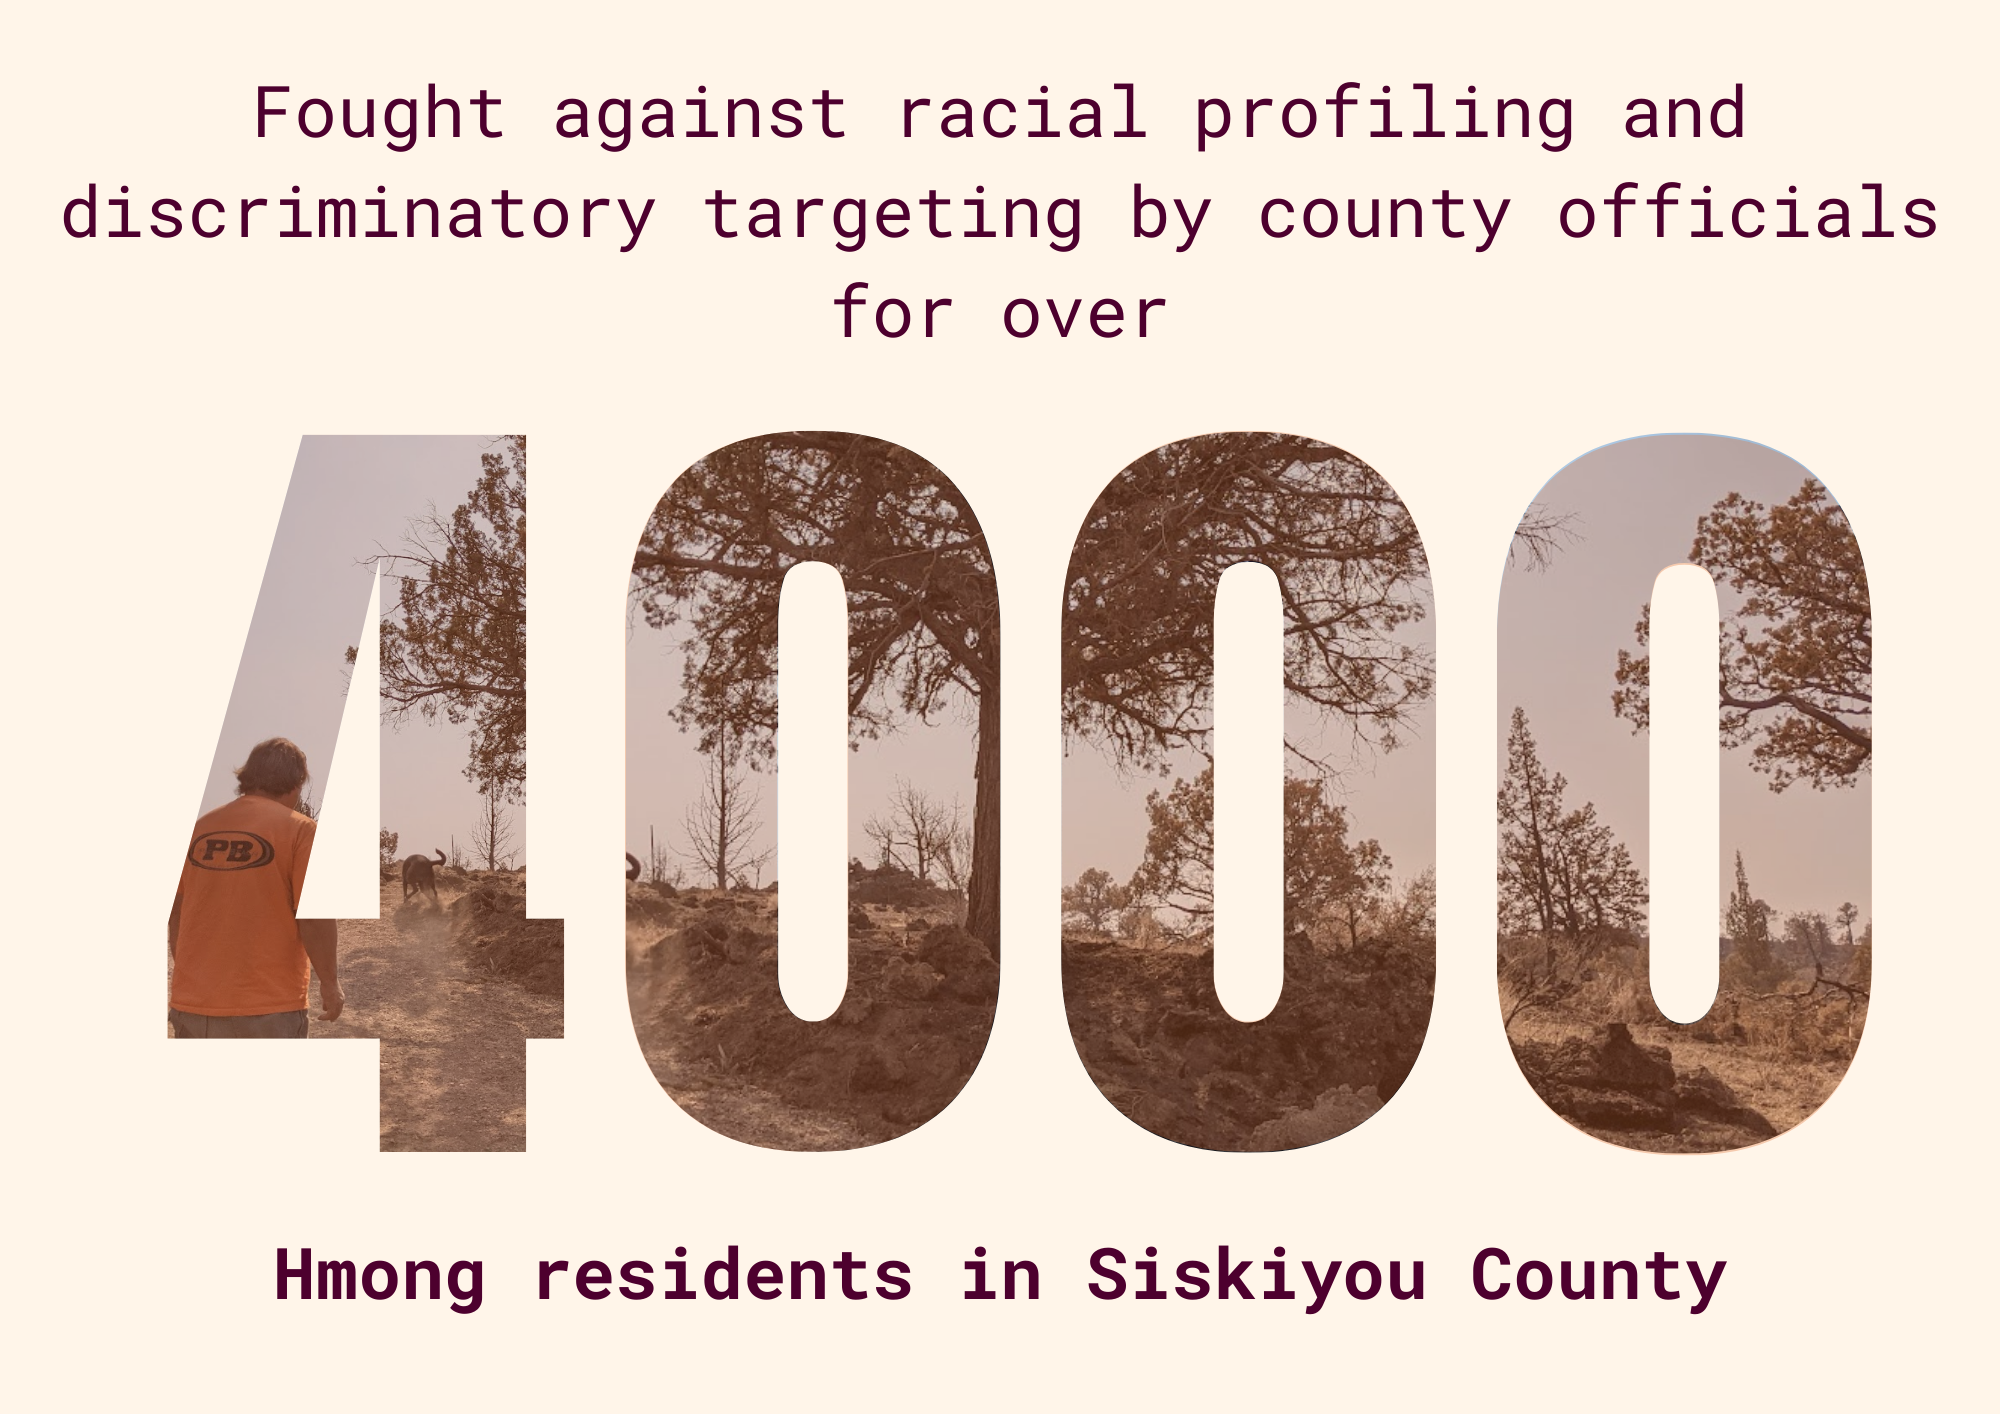 We fought against racial profiling and discriminatory targeting by county officials for over 4,000 Hmong residents in Siskiyou County.